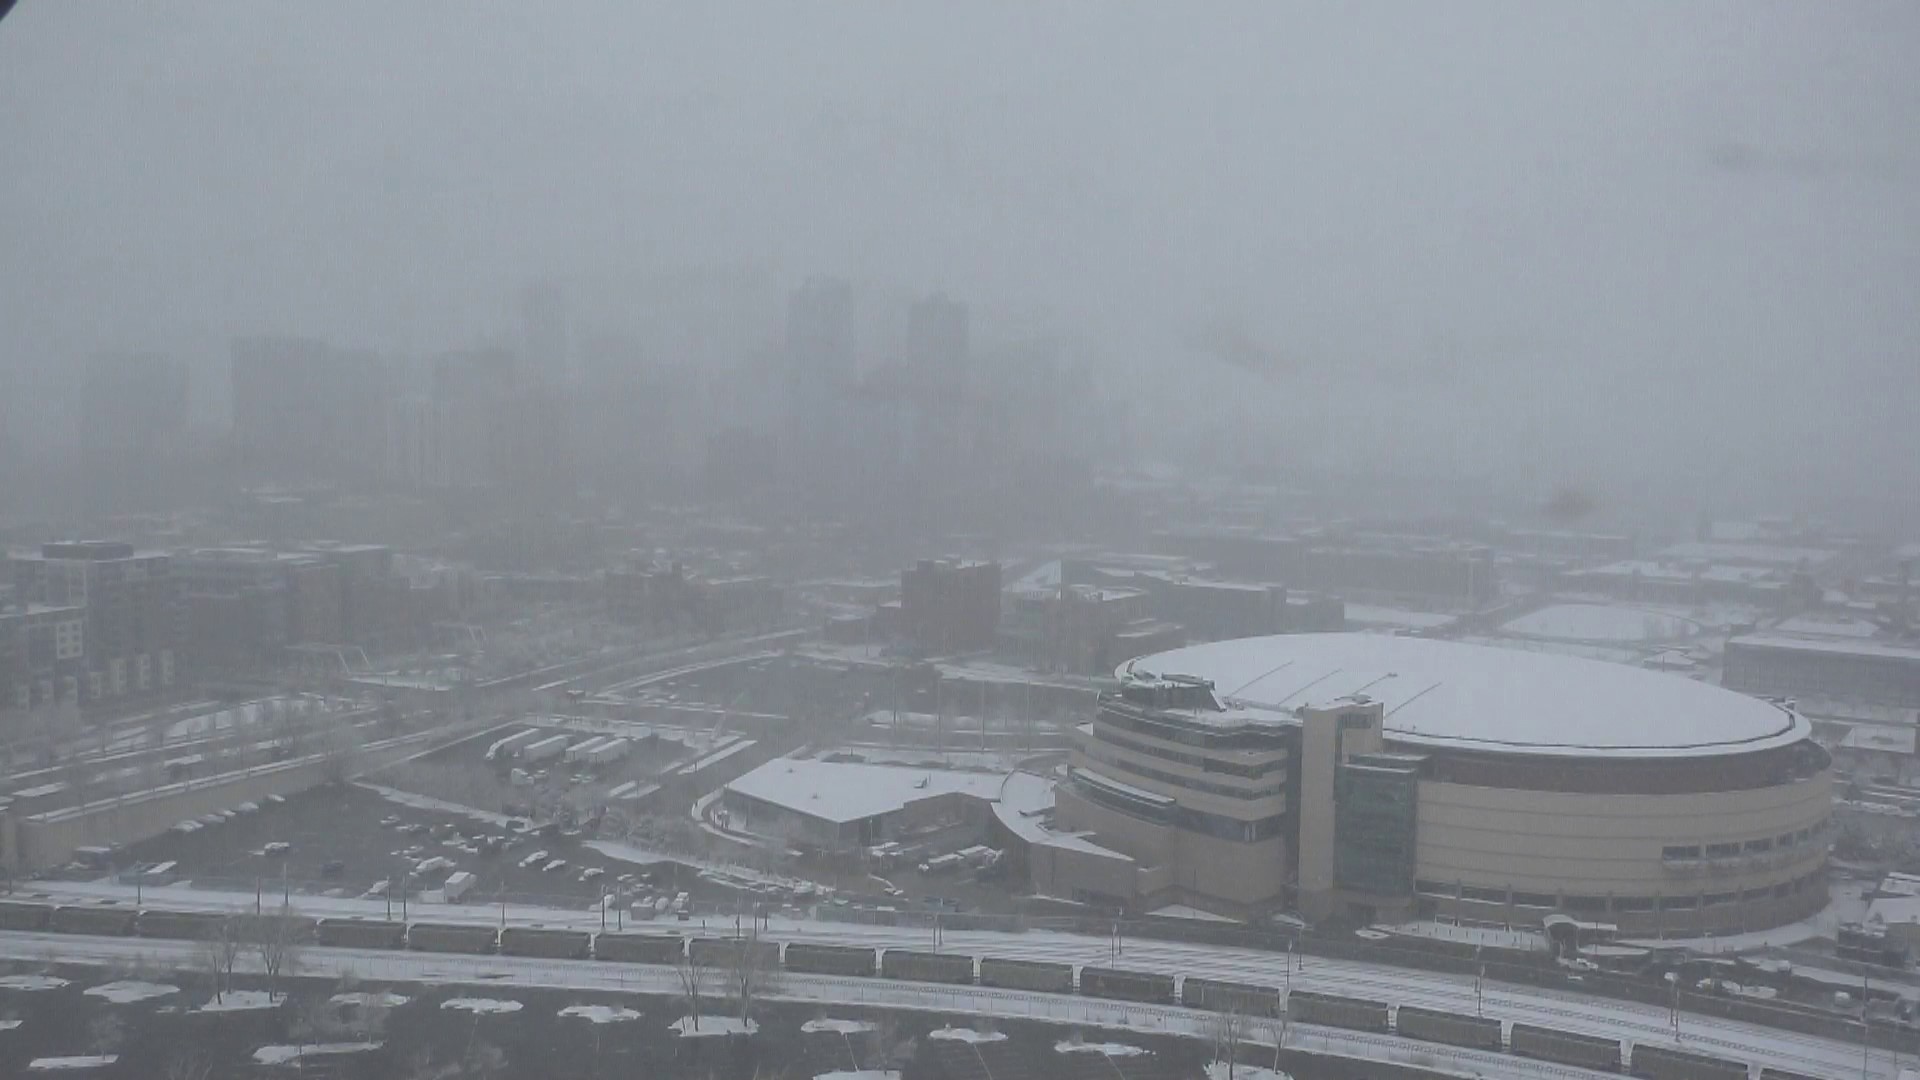 Here's a live look at downtown Denver on Saturday as light to moderate snow is expected to fall throughout the day.